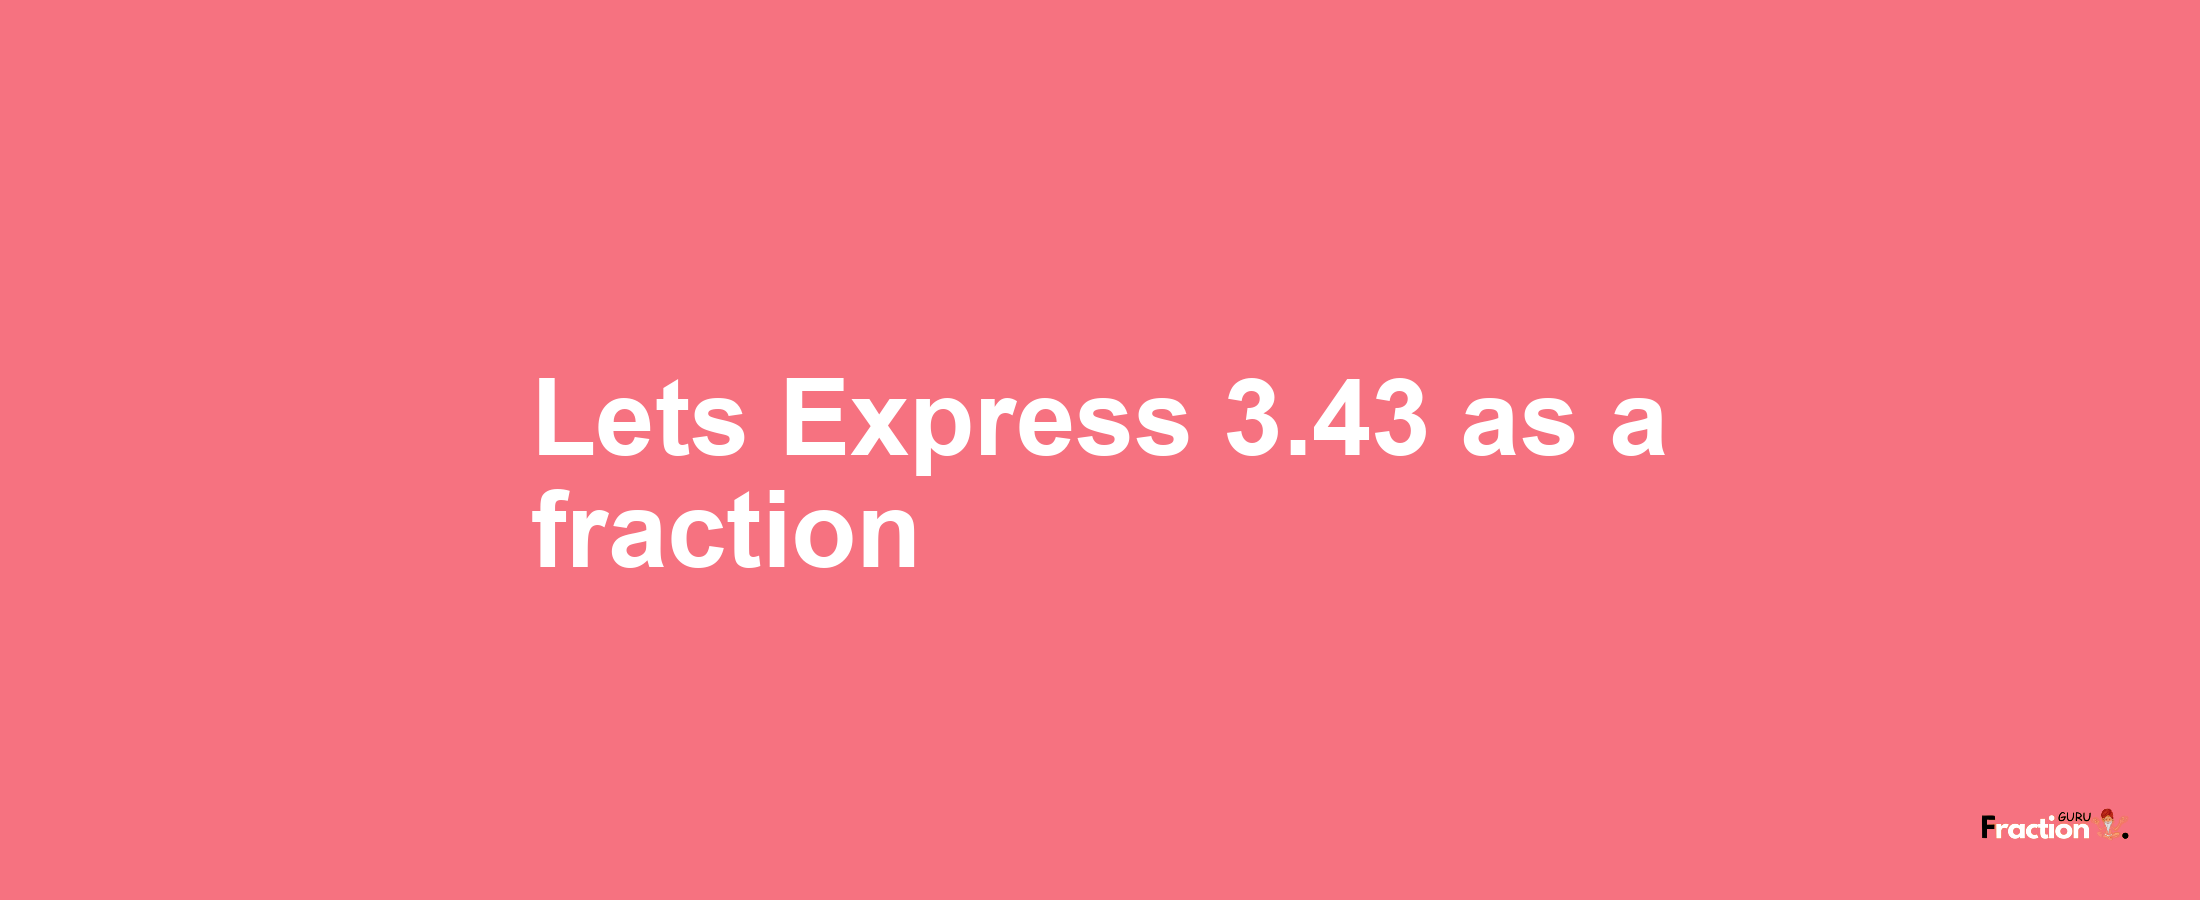 Lets Express 3.43 as afraction